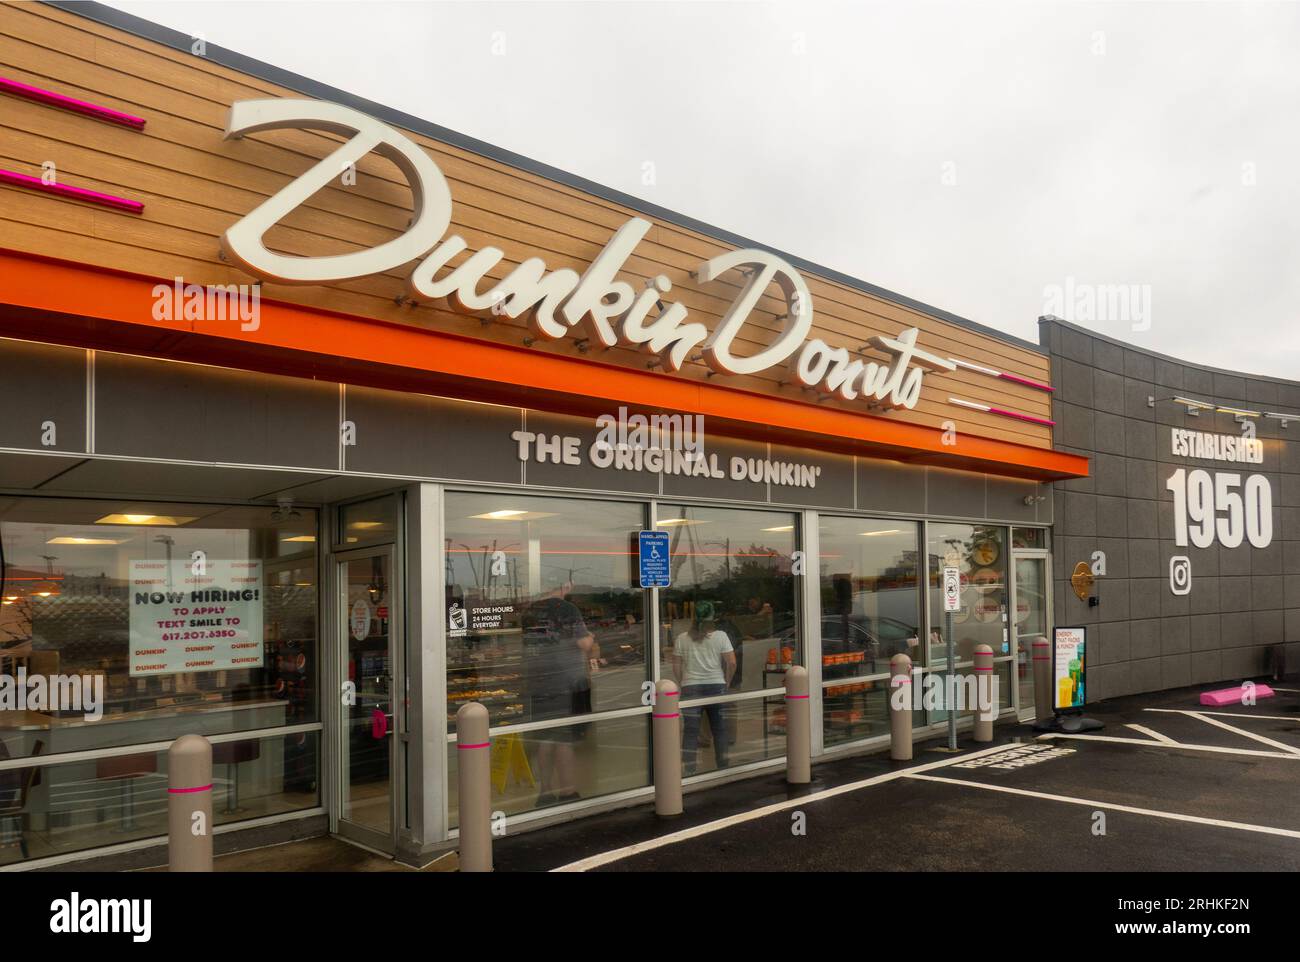 Site of the original Dunkin Donuts building in Quincy Massachusetts Stock Photo